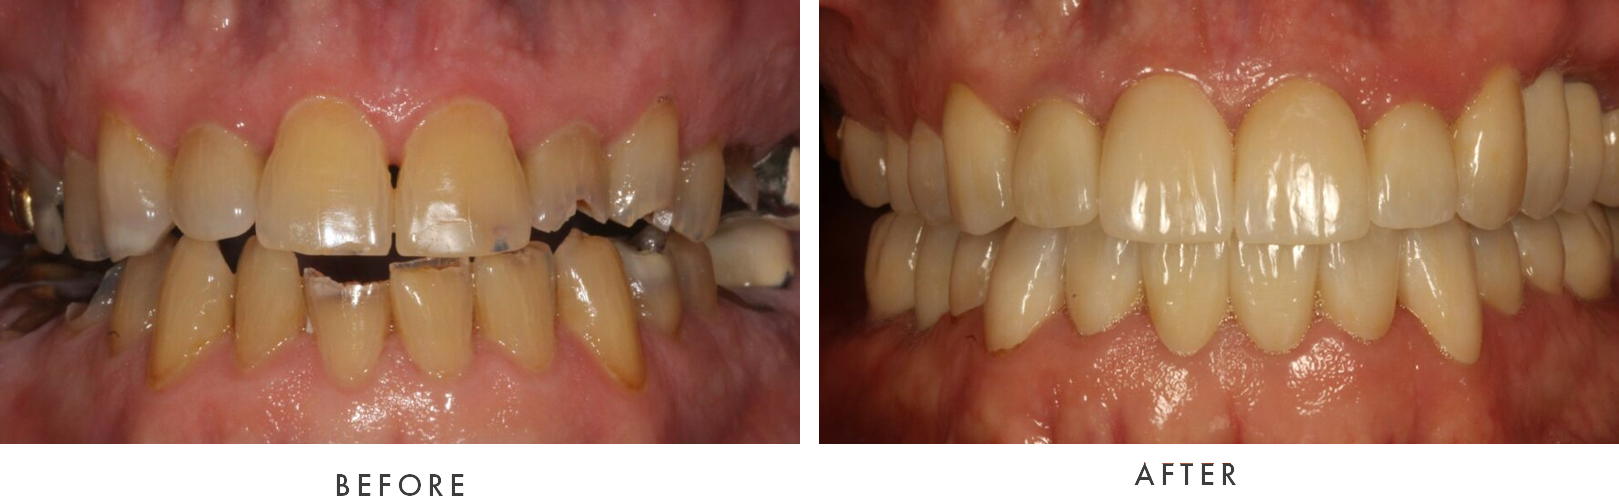 dental crown combined case 2 drscruggs